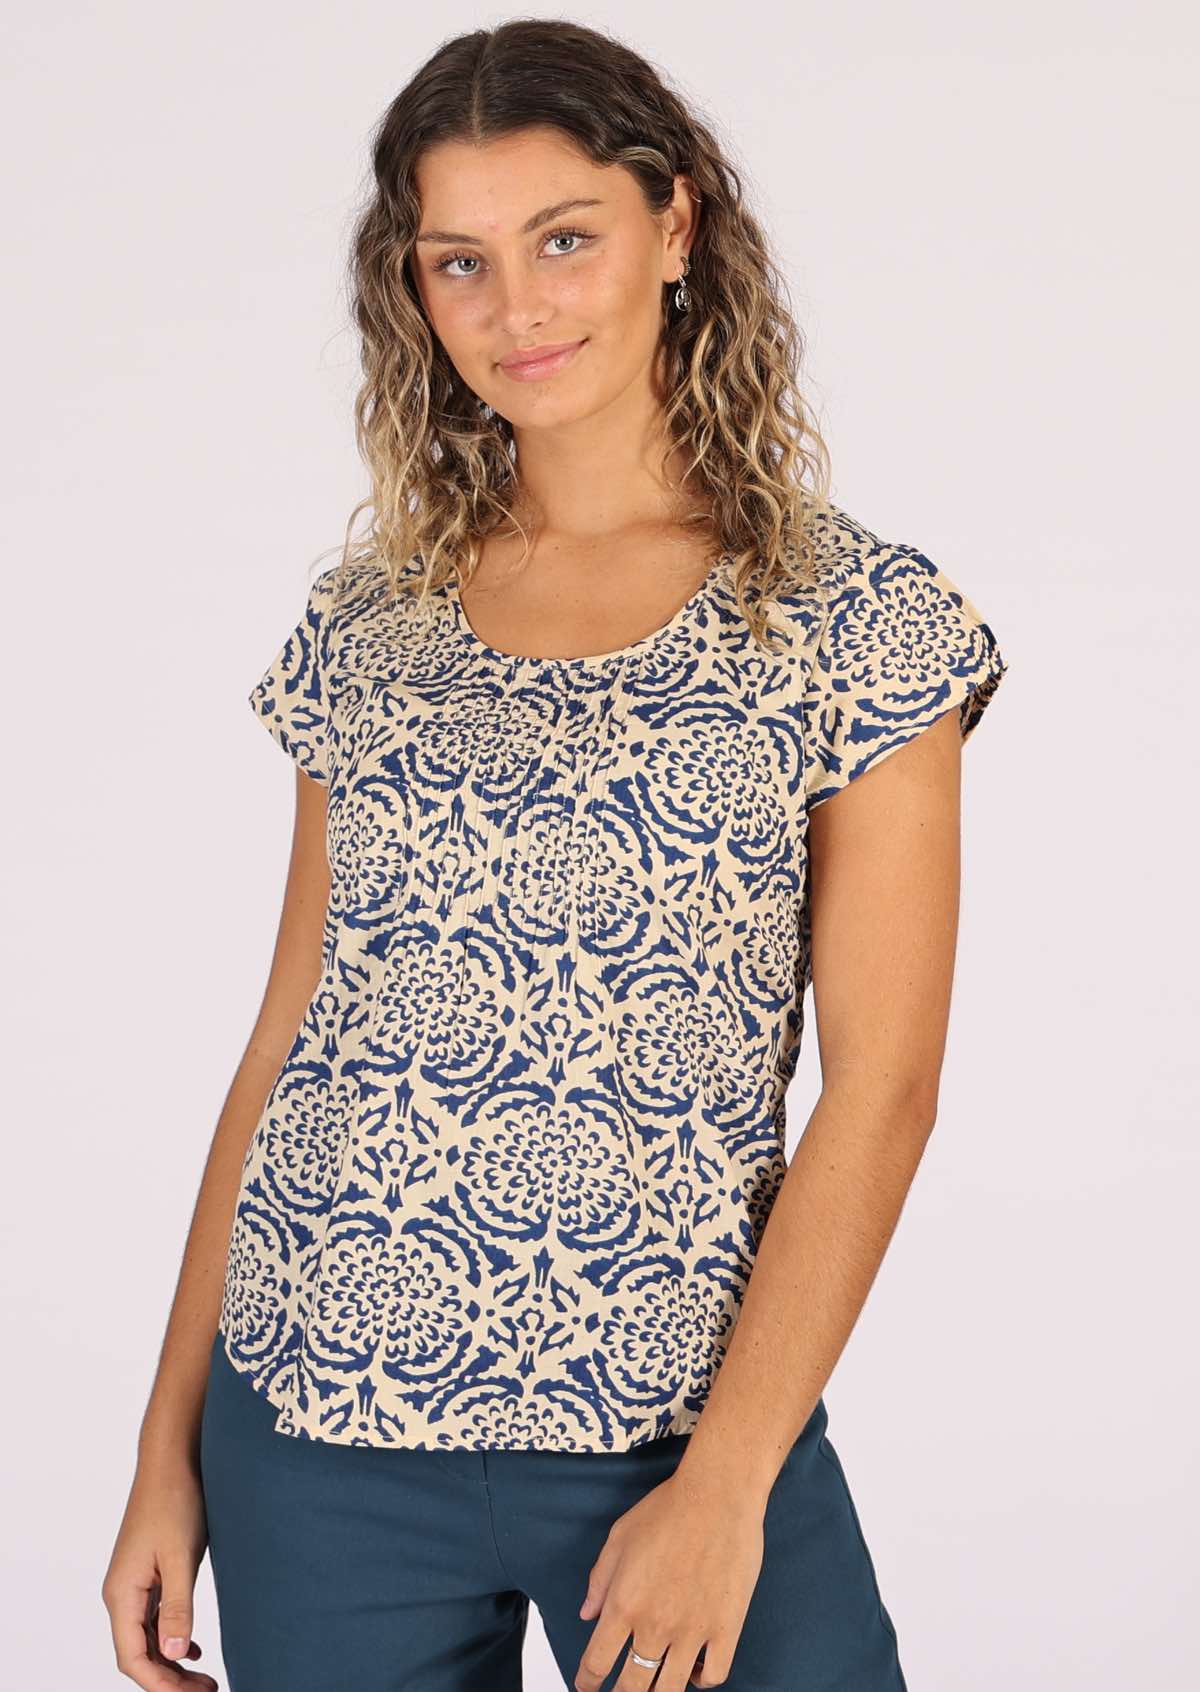 Model wears sweet cotton top with blue floral print on cream base